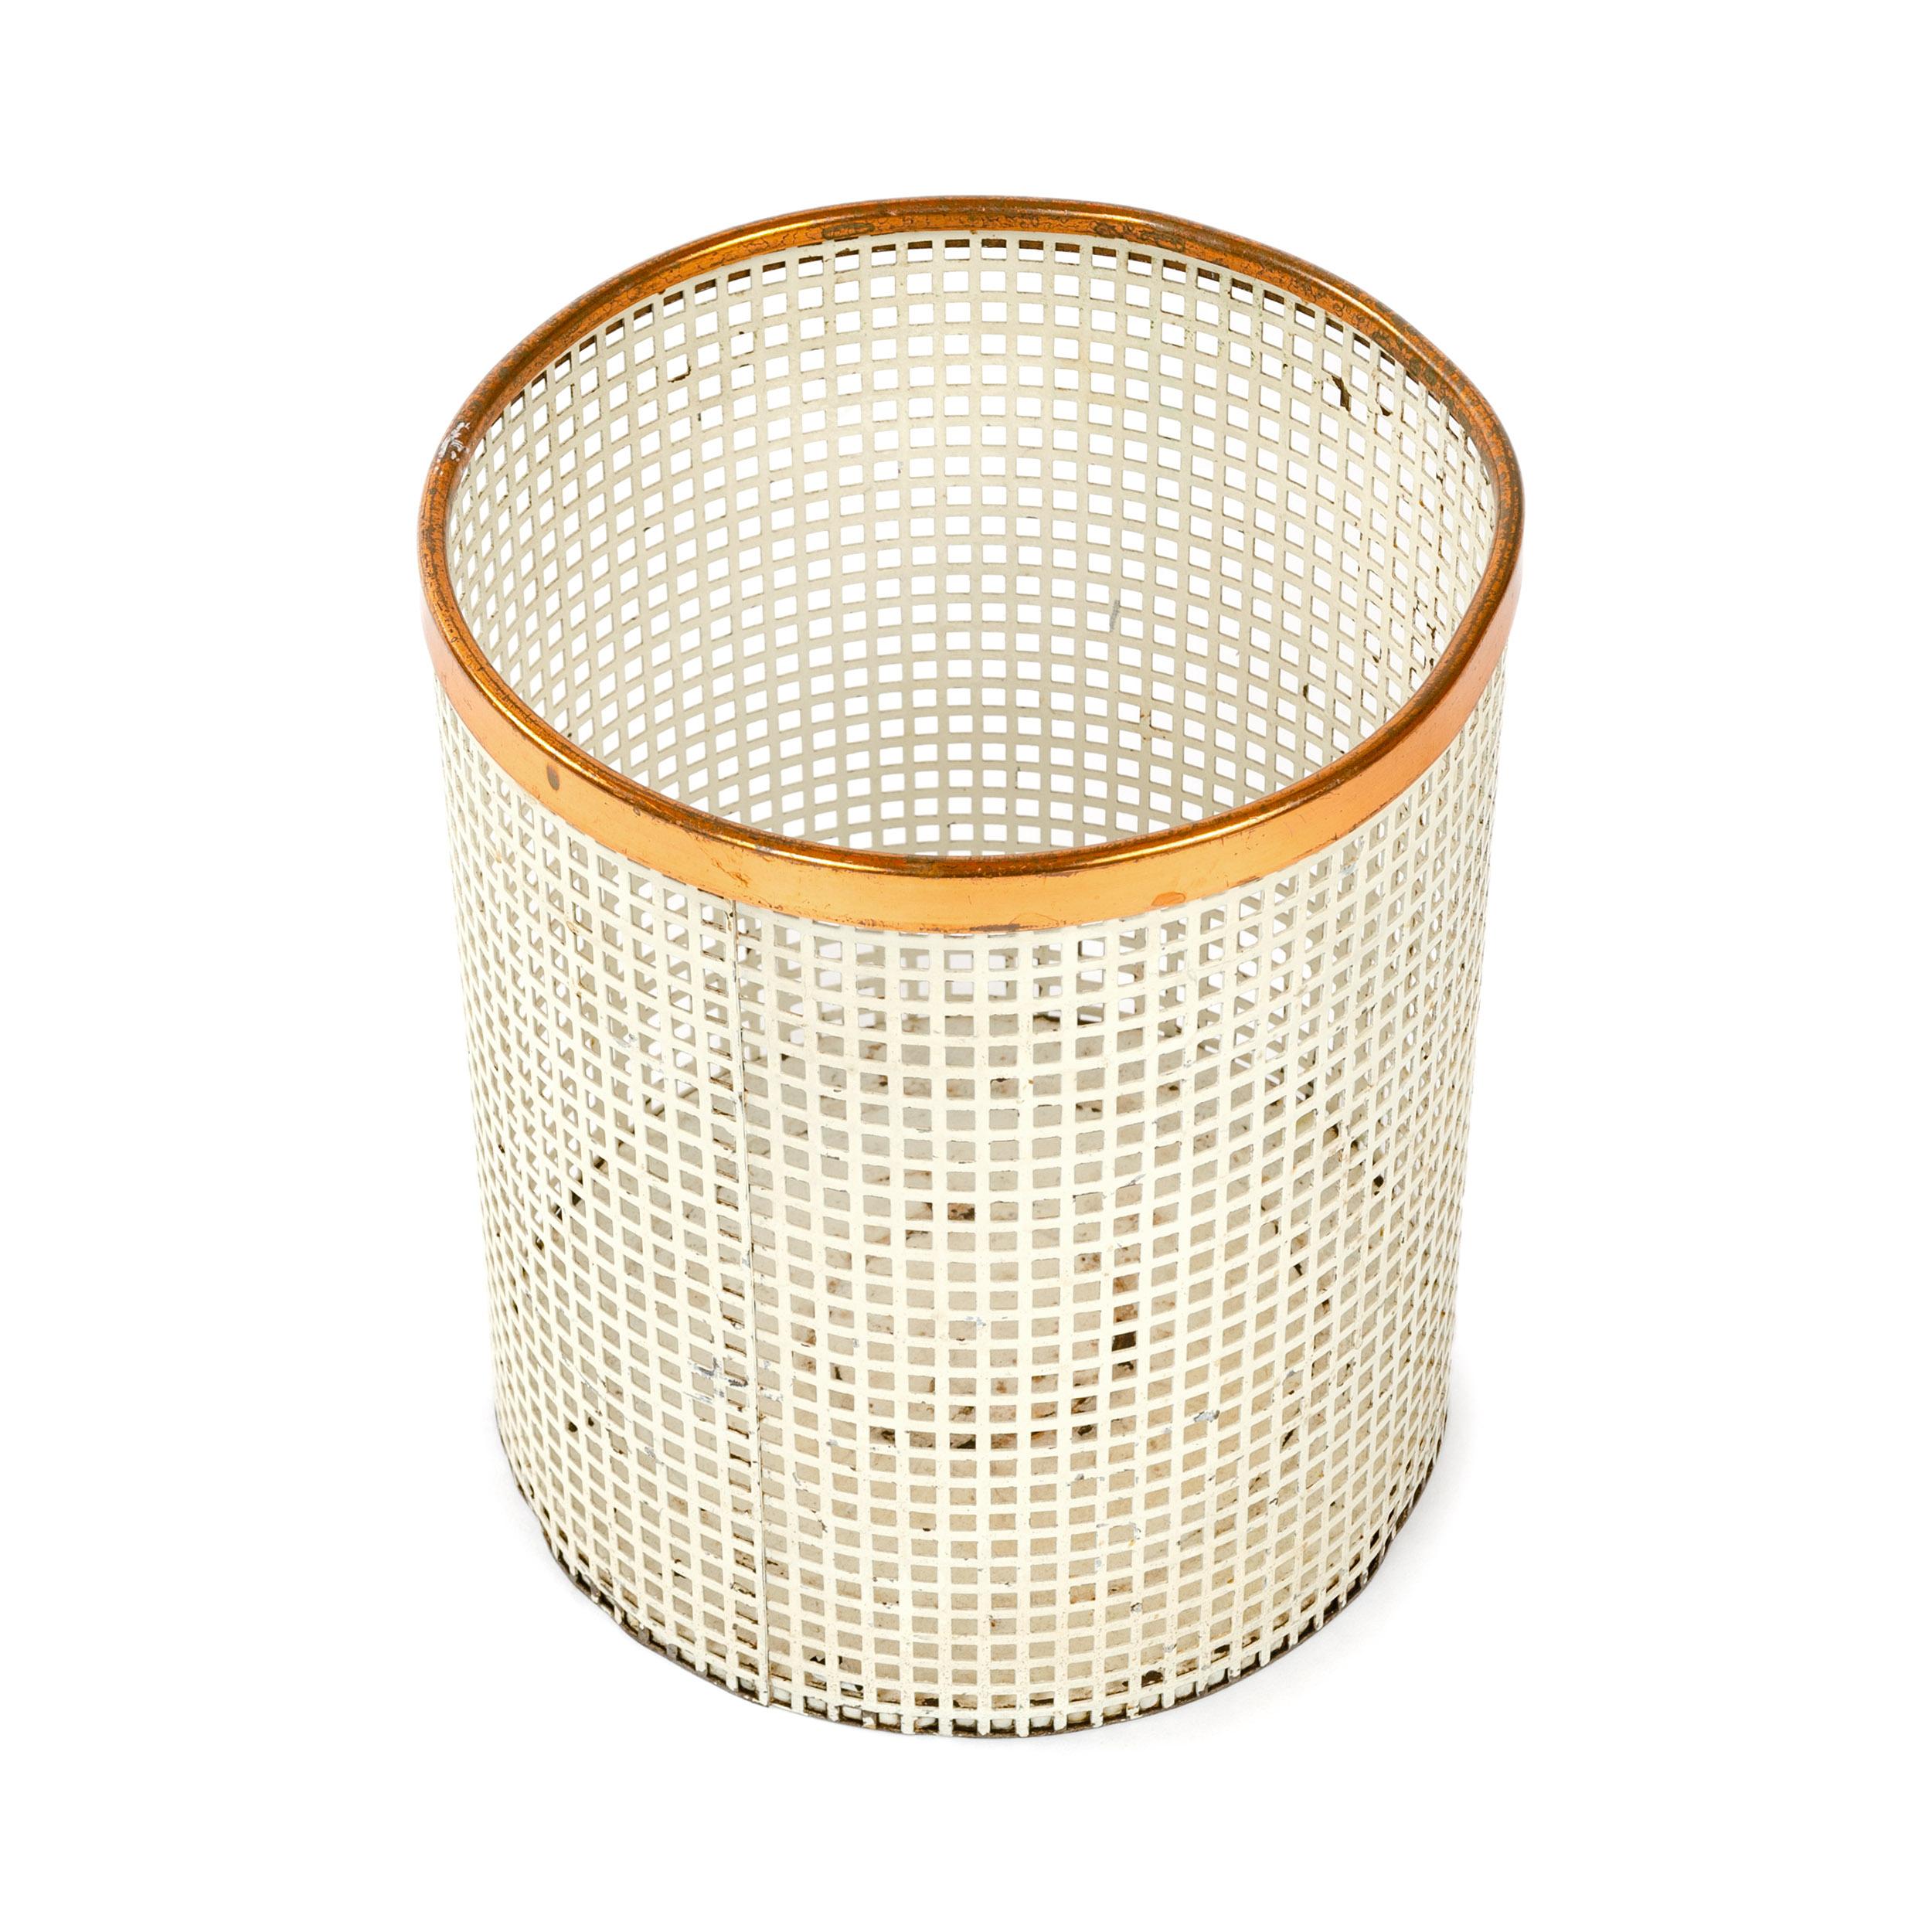 A Josef Hoffmann/Weiner Werkstatte inspired circular waste receptacle of formed, extruded steel in a white enameled finish and copper band around its rim.